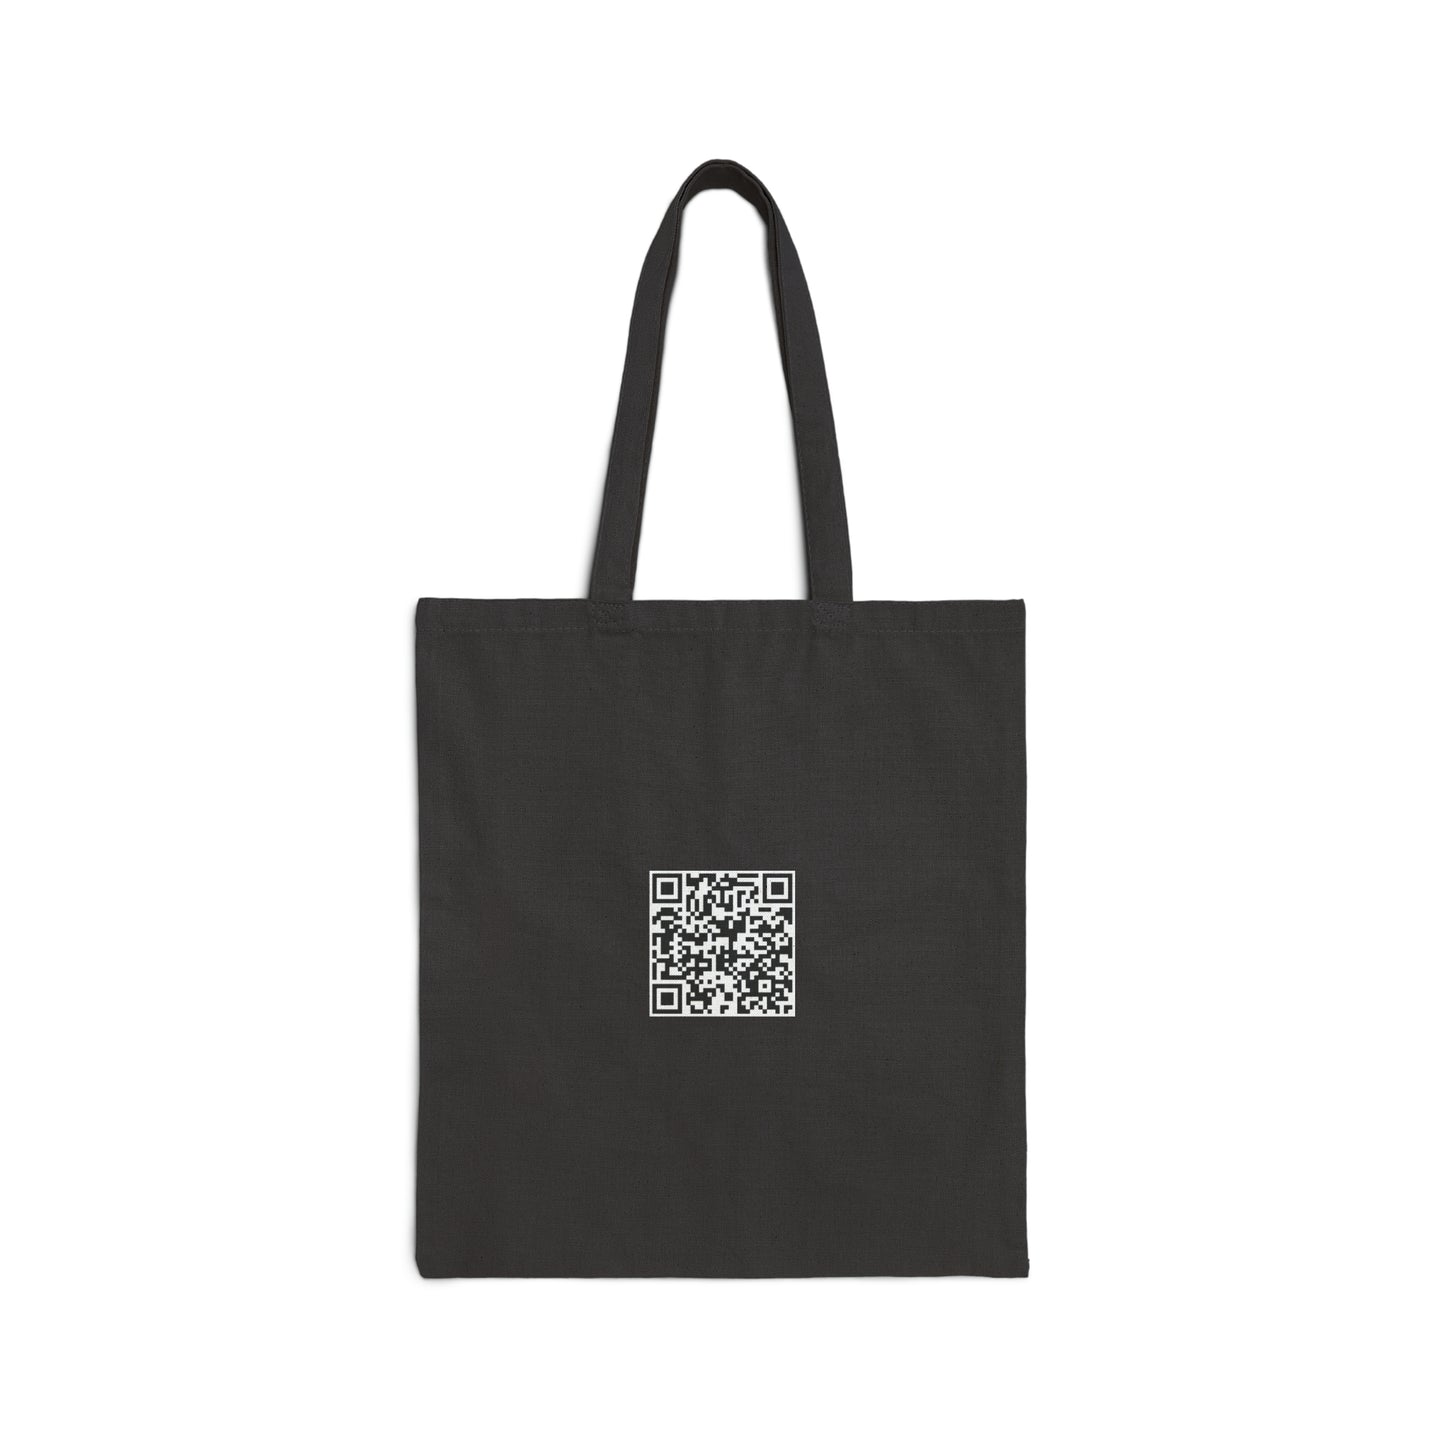 Woman in the Woods - Cotton Canvas Tote Bag